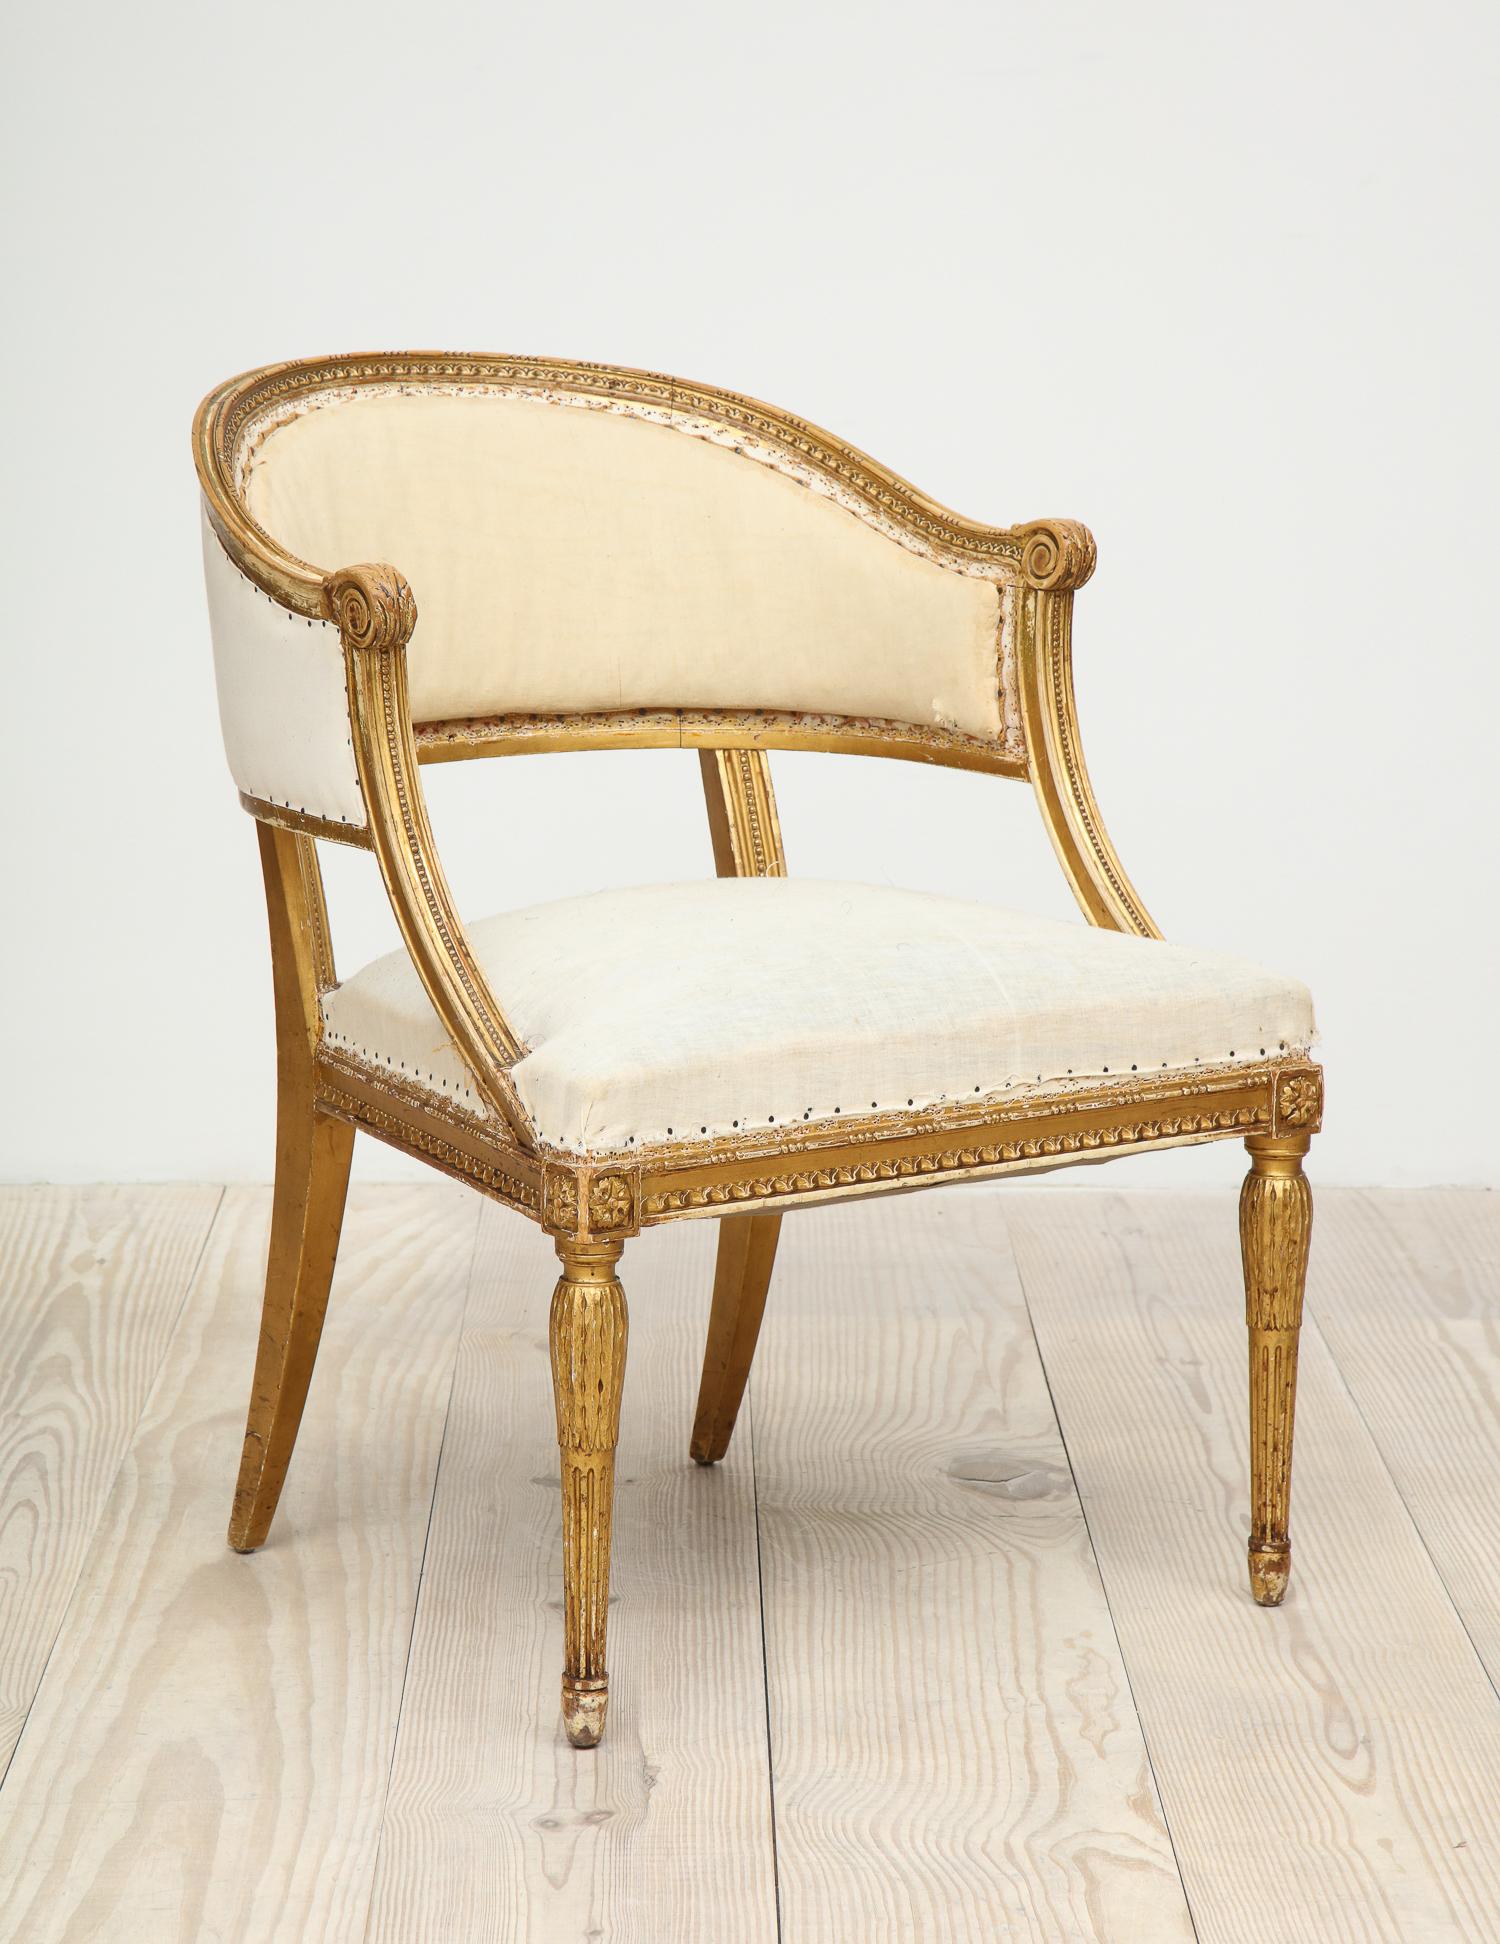 18th Century Giltwood Gustavian Bucket Chairs, Set of 4, Sweden, Circa 1790-1800 For Sale 3